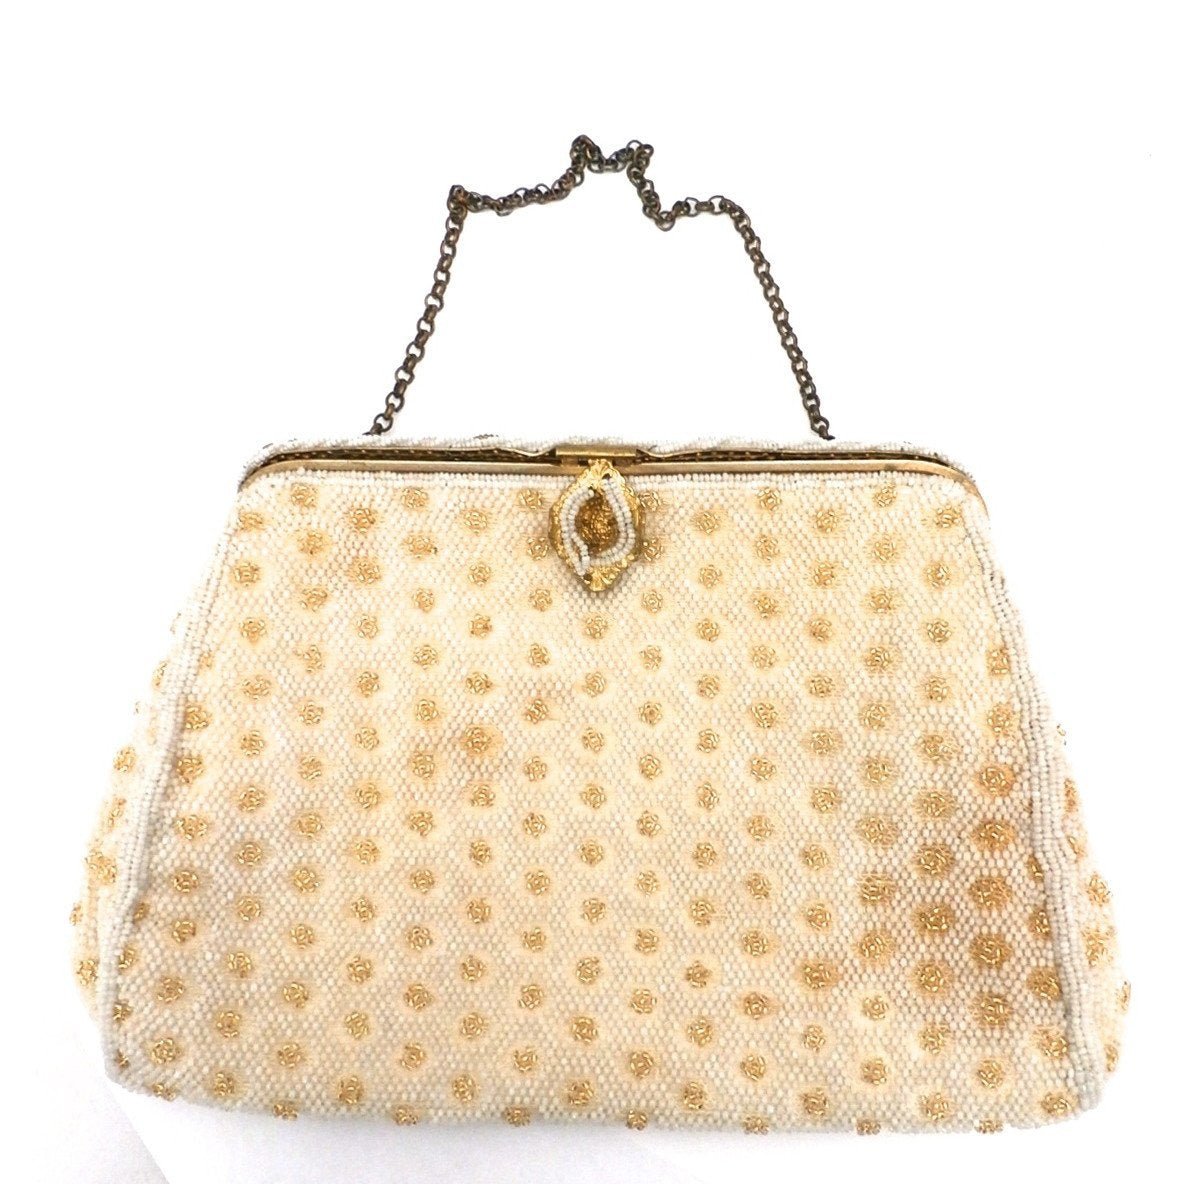 Vintage 1930 Beaded Purse Made In France Label White Seed Beads Clutch Bag